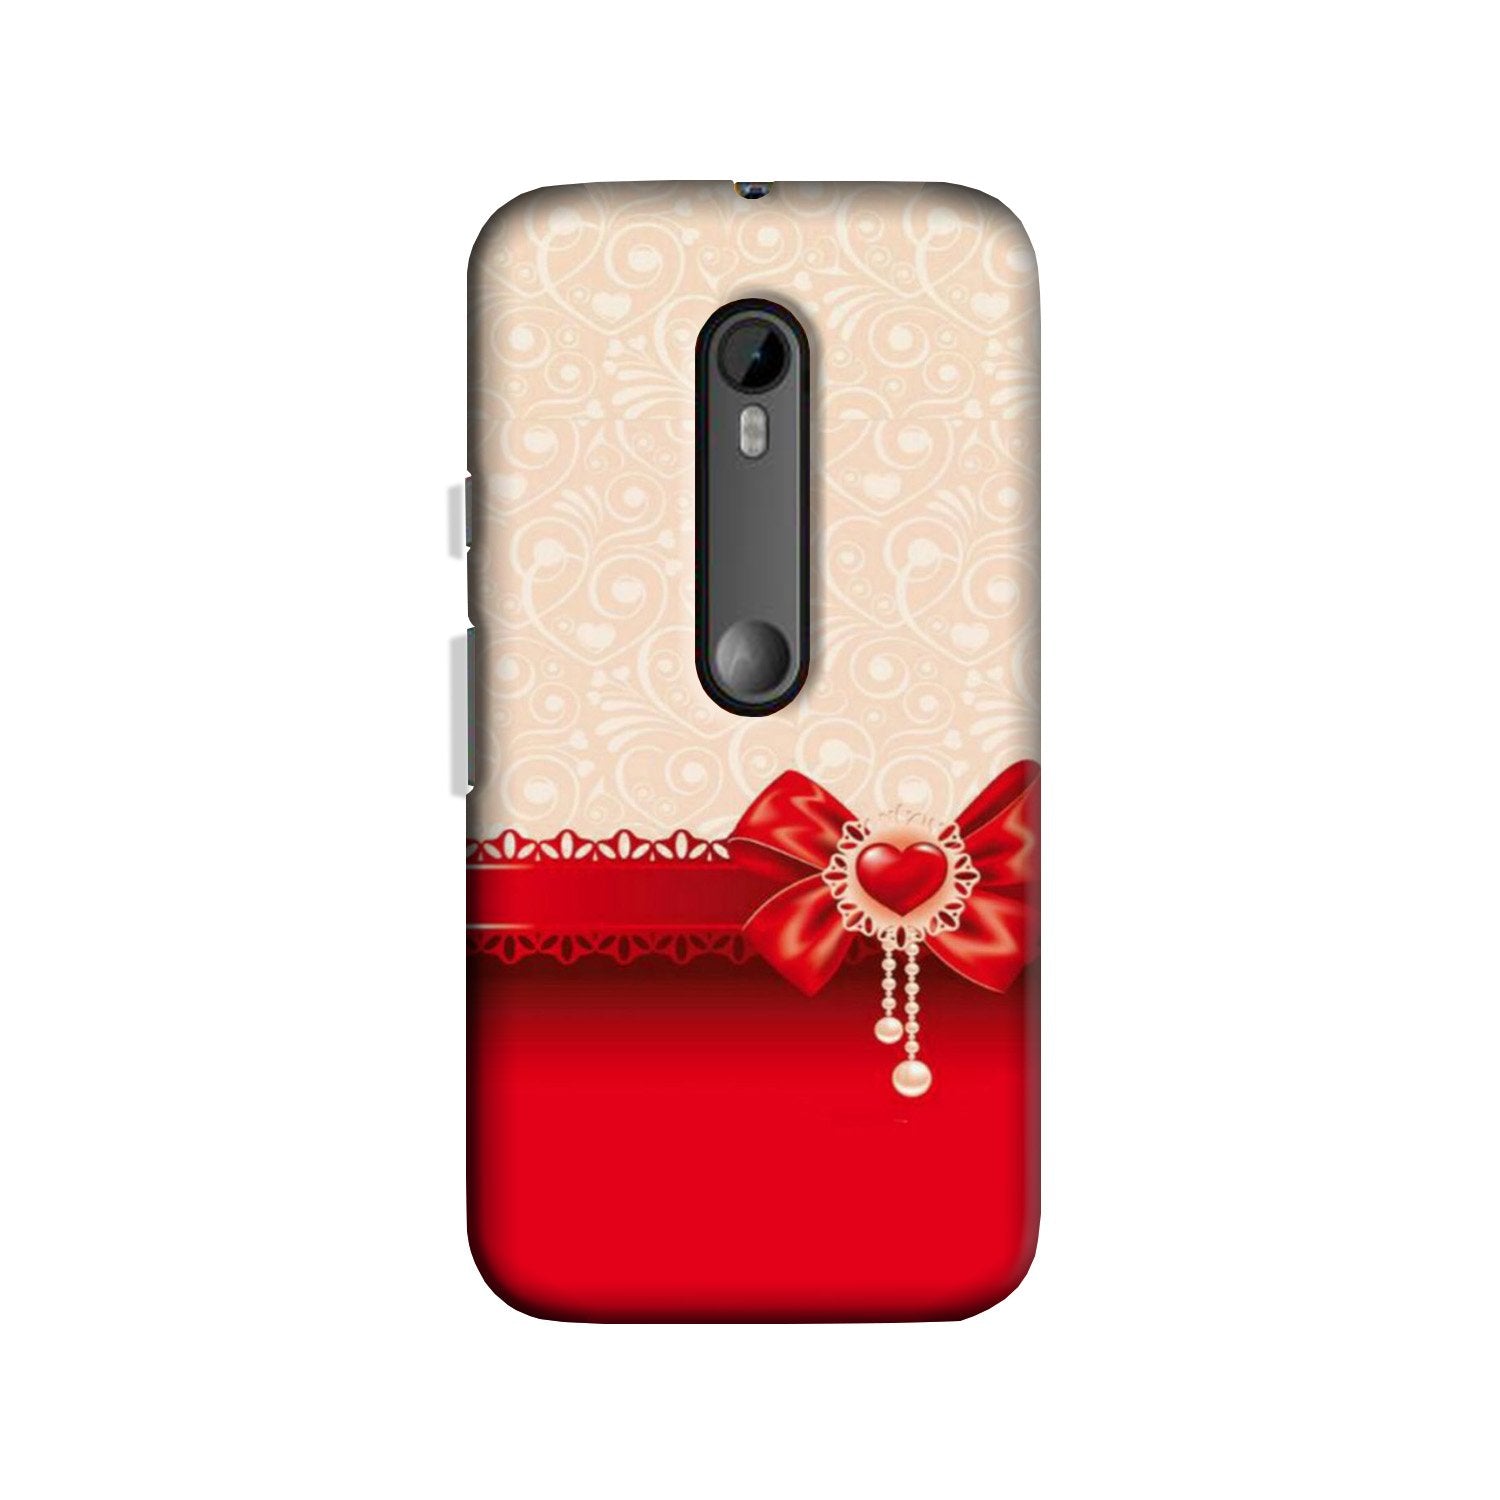 Gift Wrap3 Case for Moto X Play